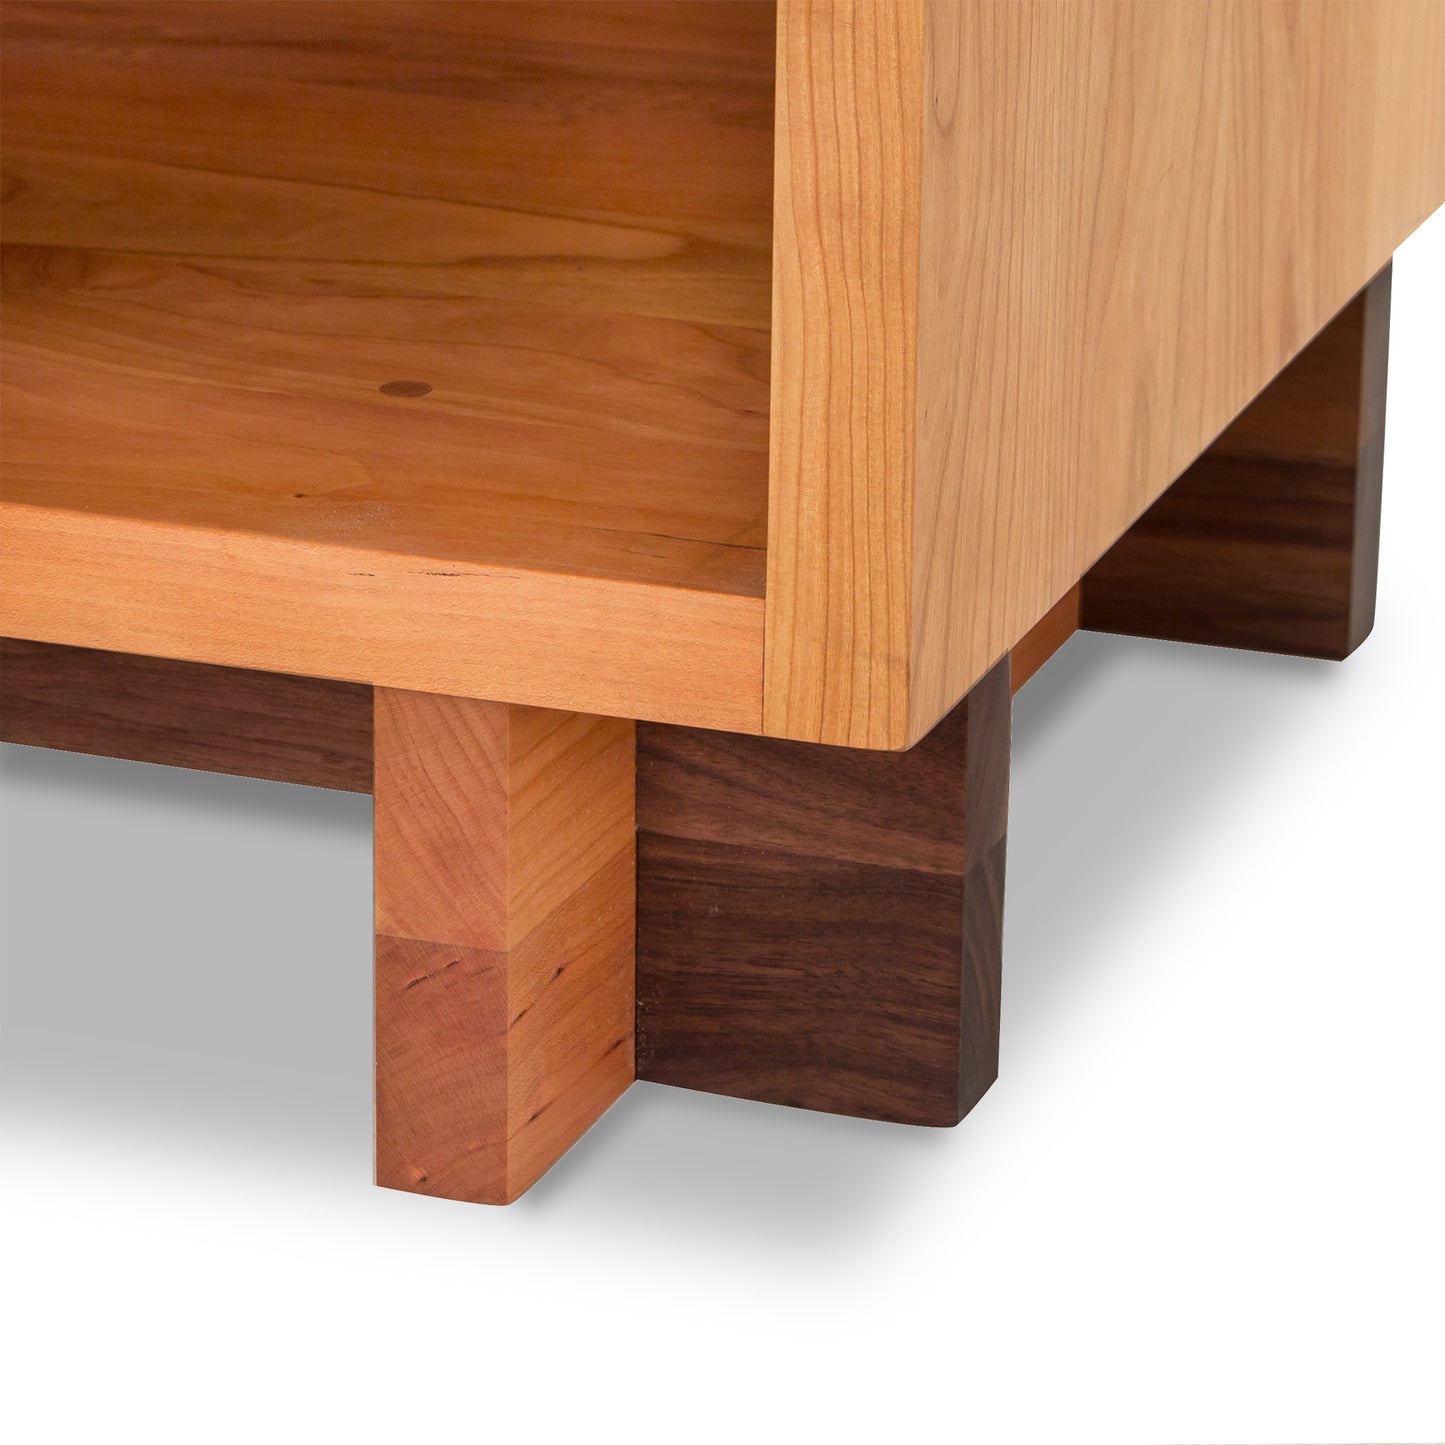 Close-up of a Vermont Furniture Designs Modern American 1-Drawer Enclosed Shelf Nightstand showing the details of its construction, focusing on the joint area where two types of wood meet.